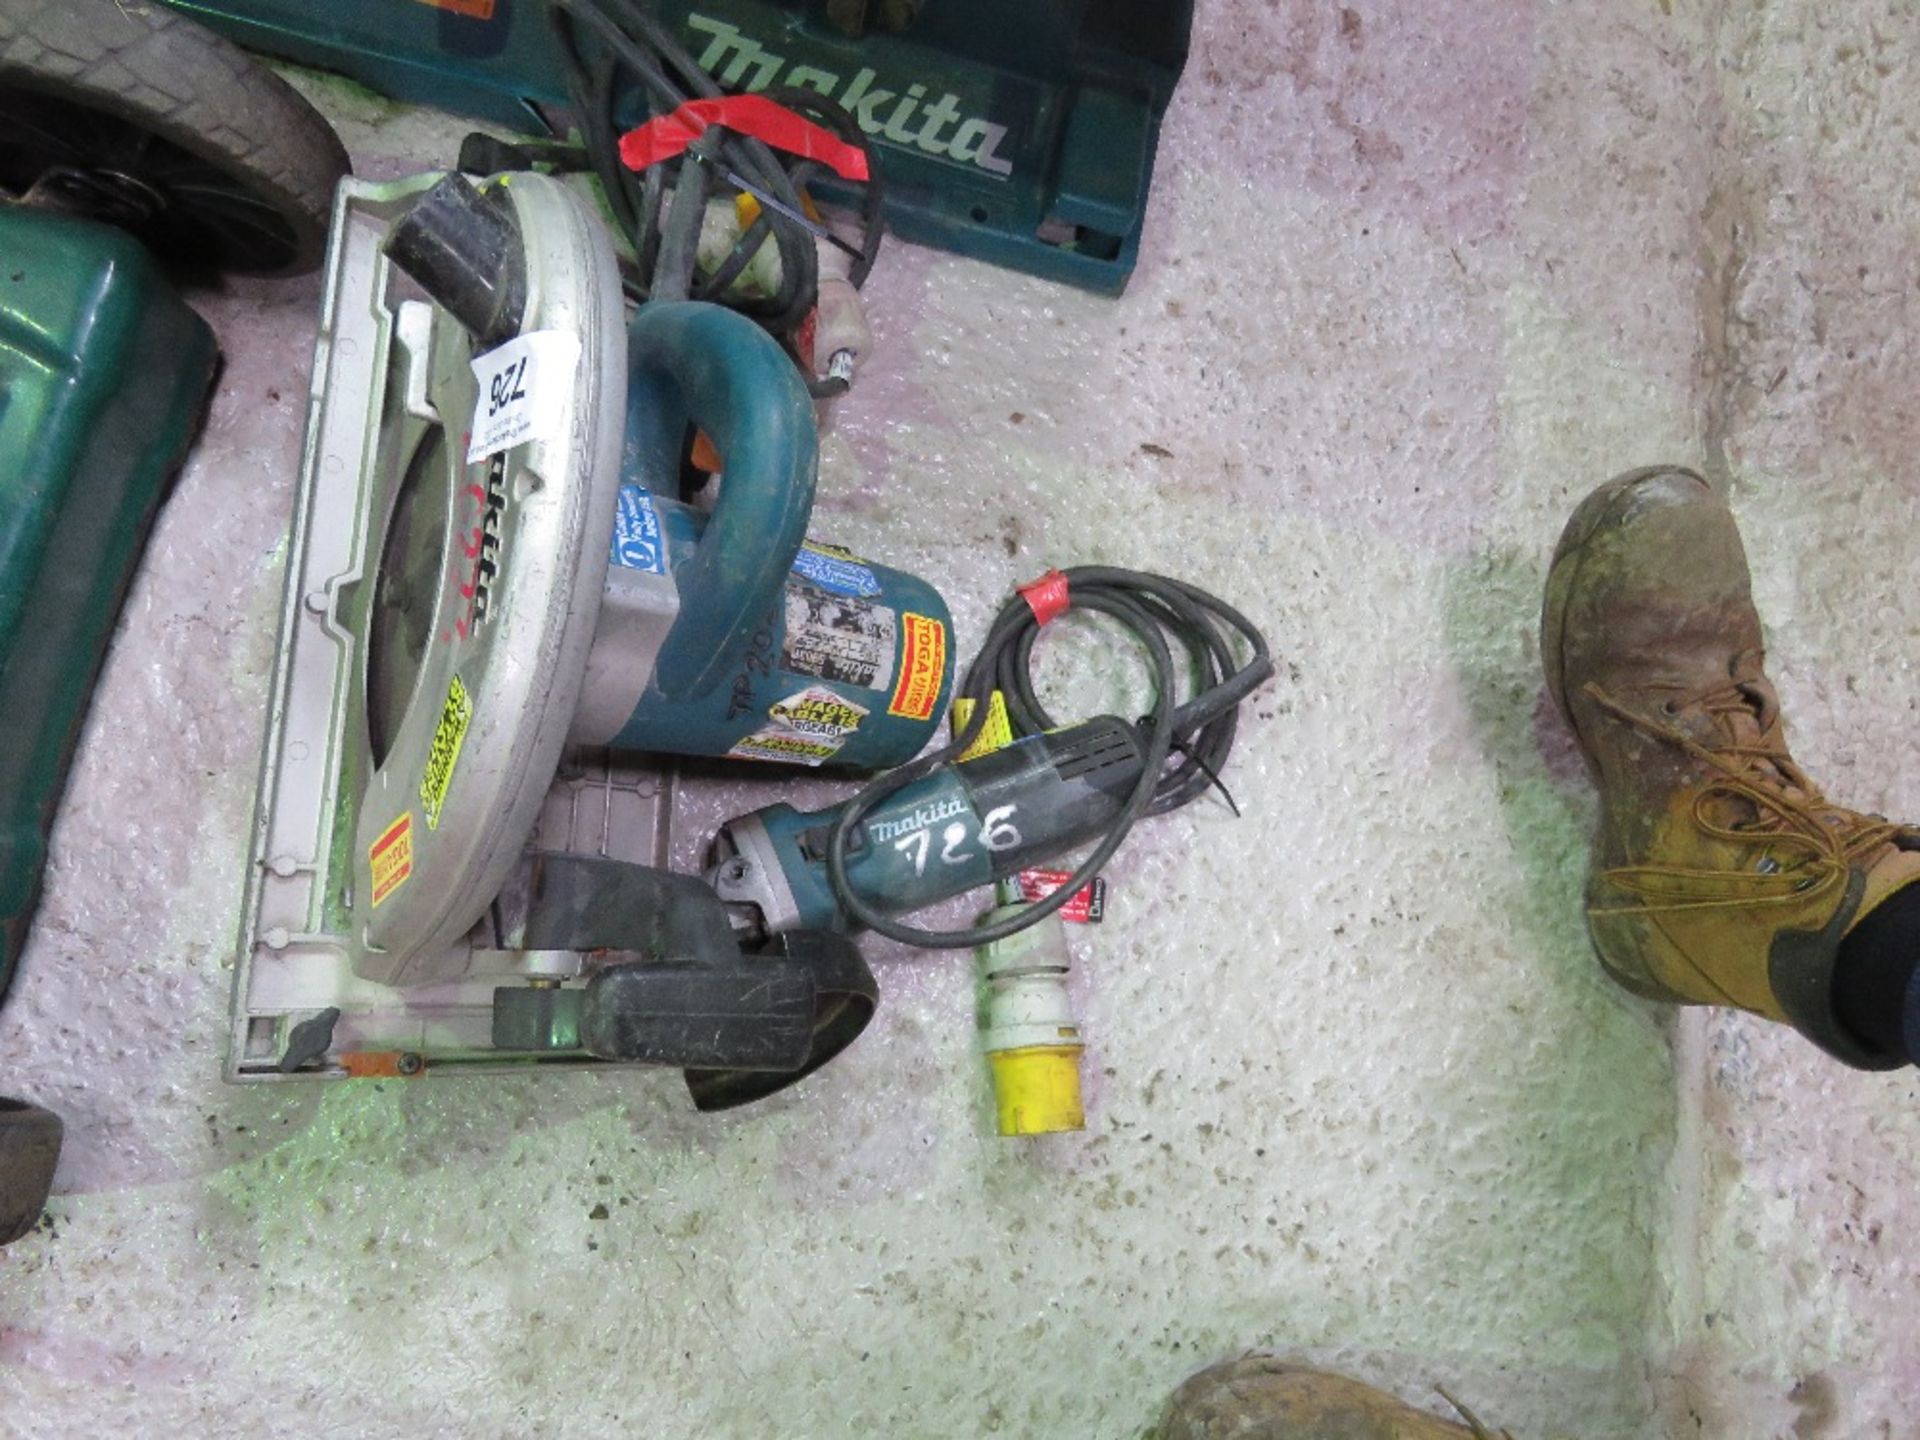 2 X POWER TOOLS. 110VOLT GRINDER AND CIRCULAR SAW. - Image 2 of 2